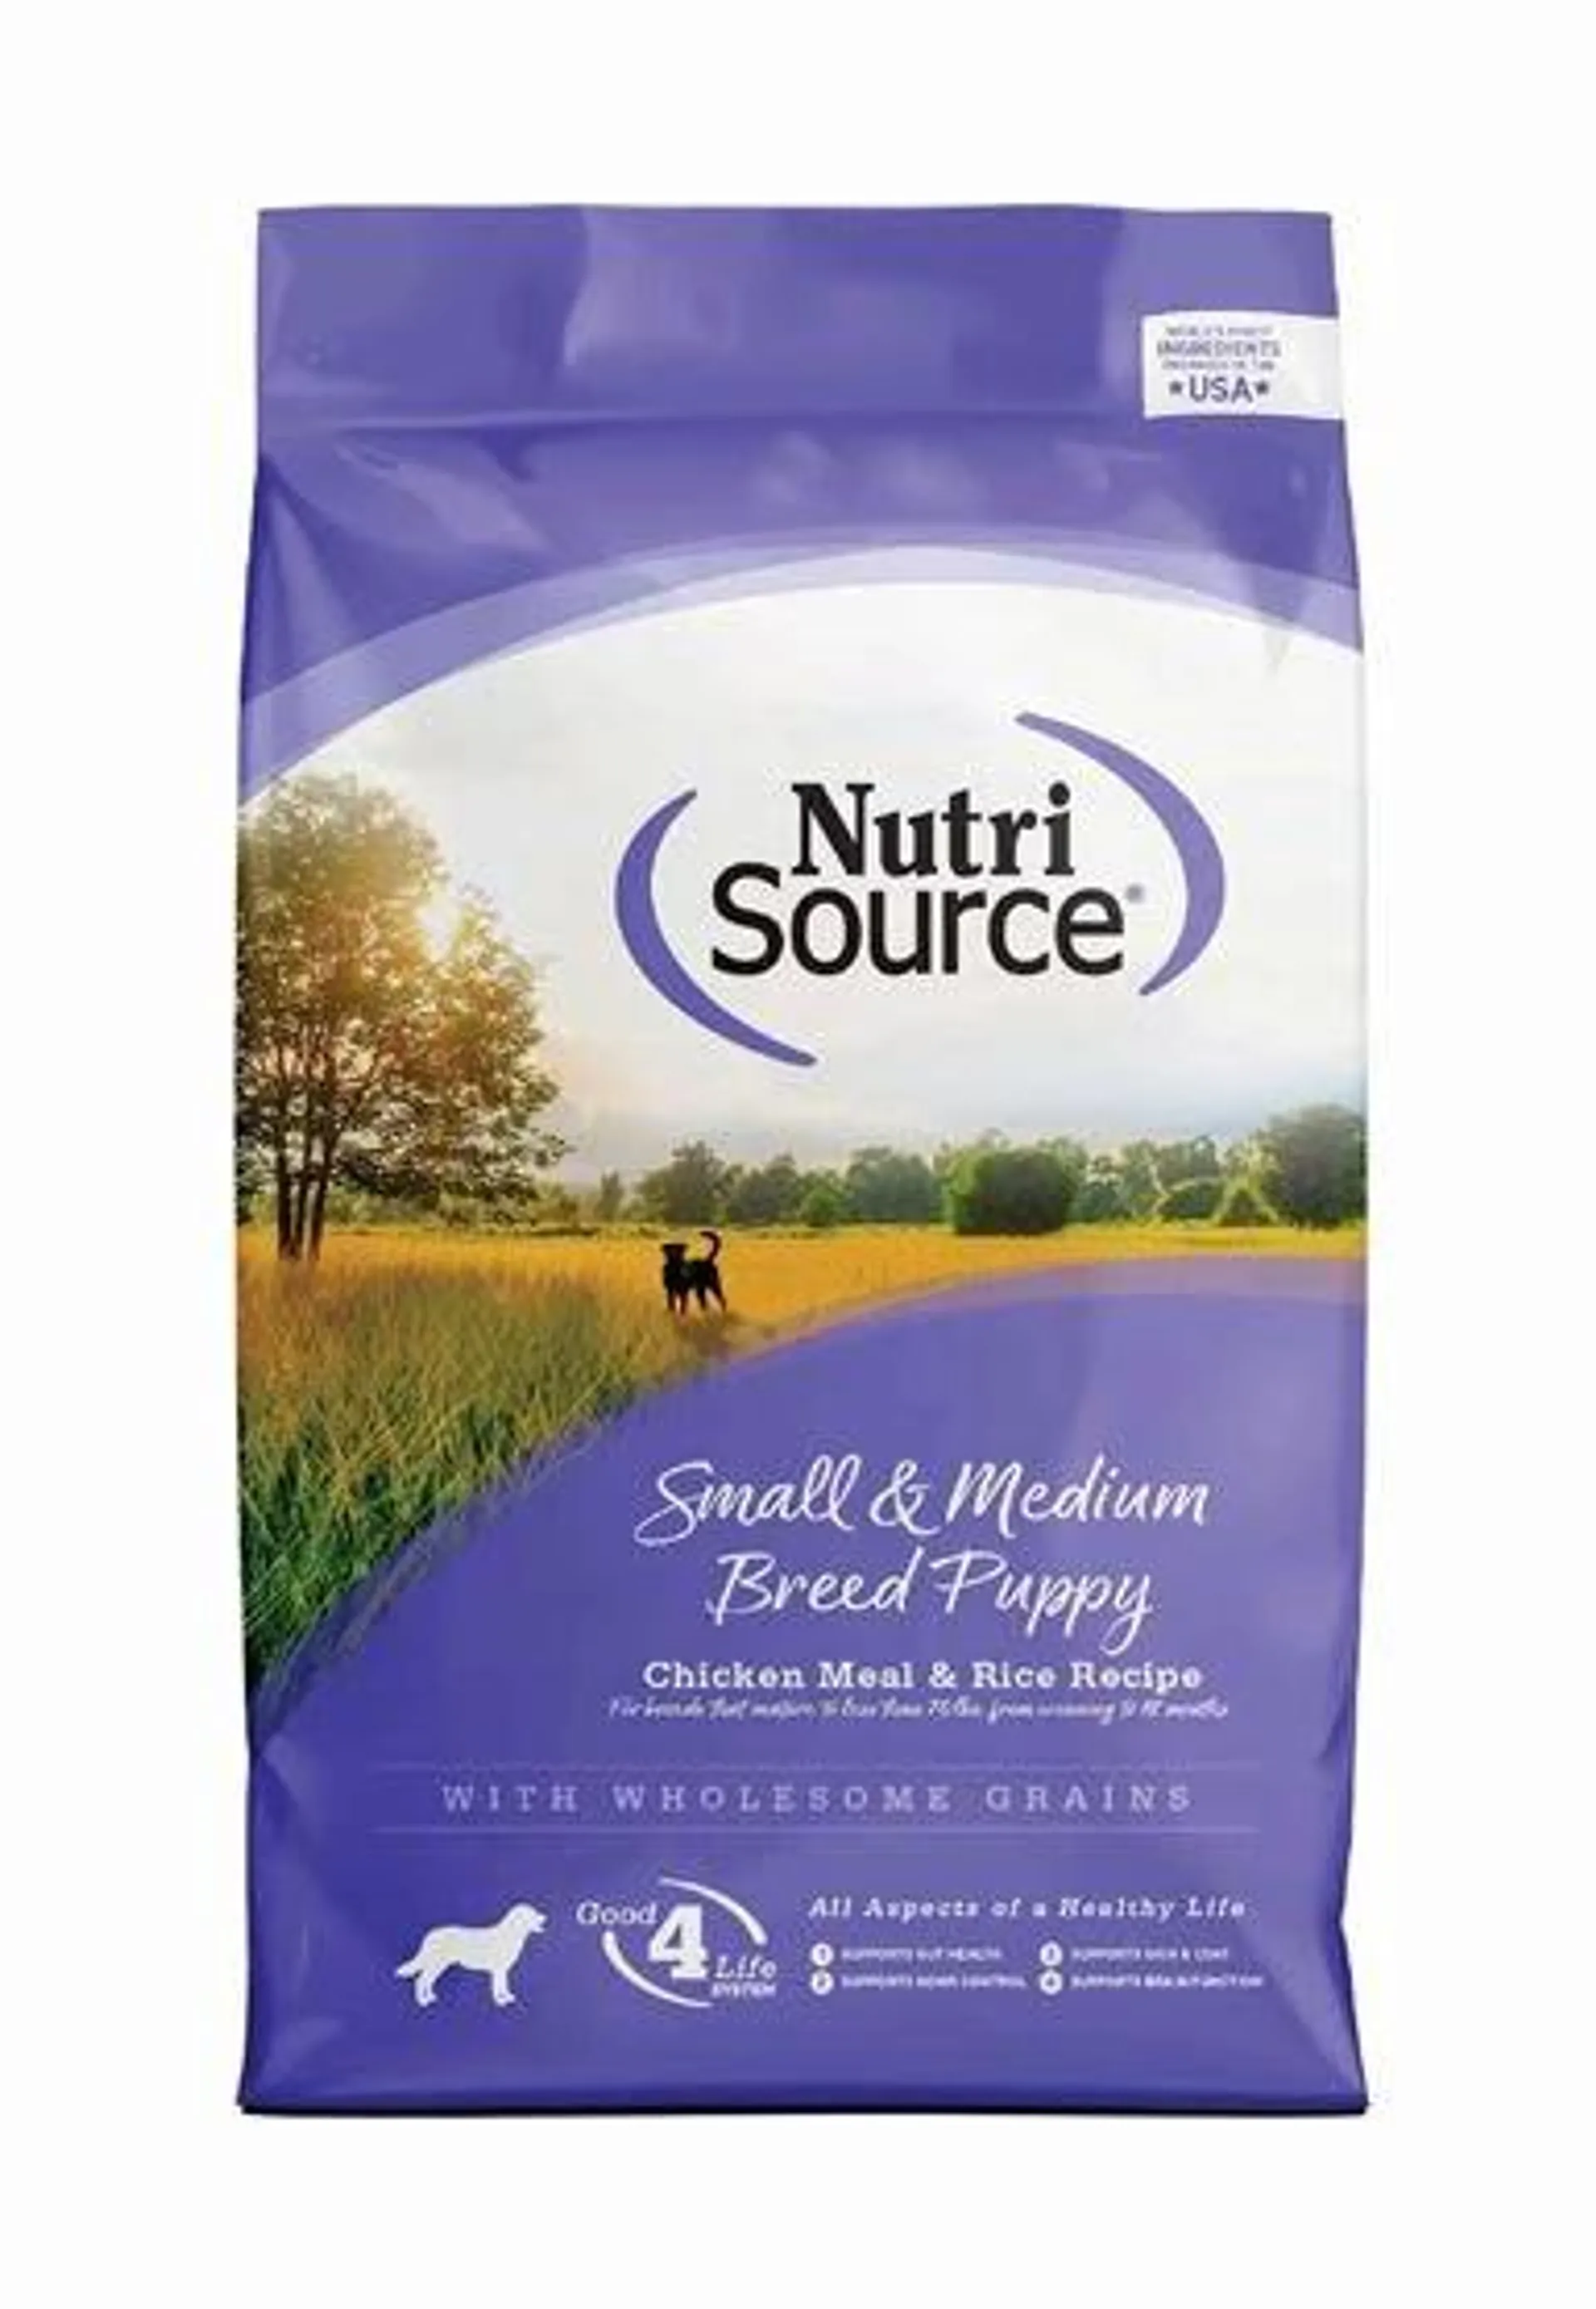 NutriSource Dog Food Puppy Chicken and Rice, Small and Medium Breed, 5 Pounds